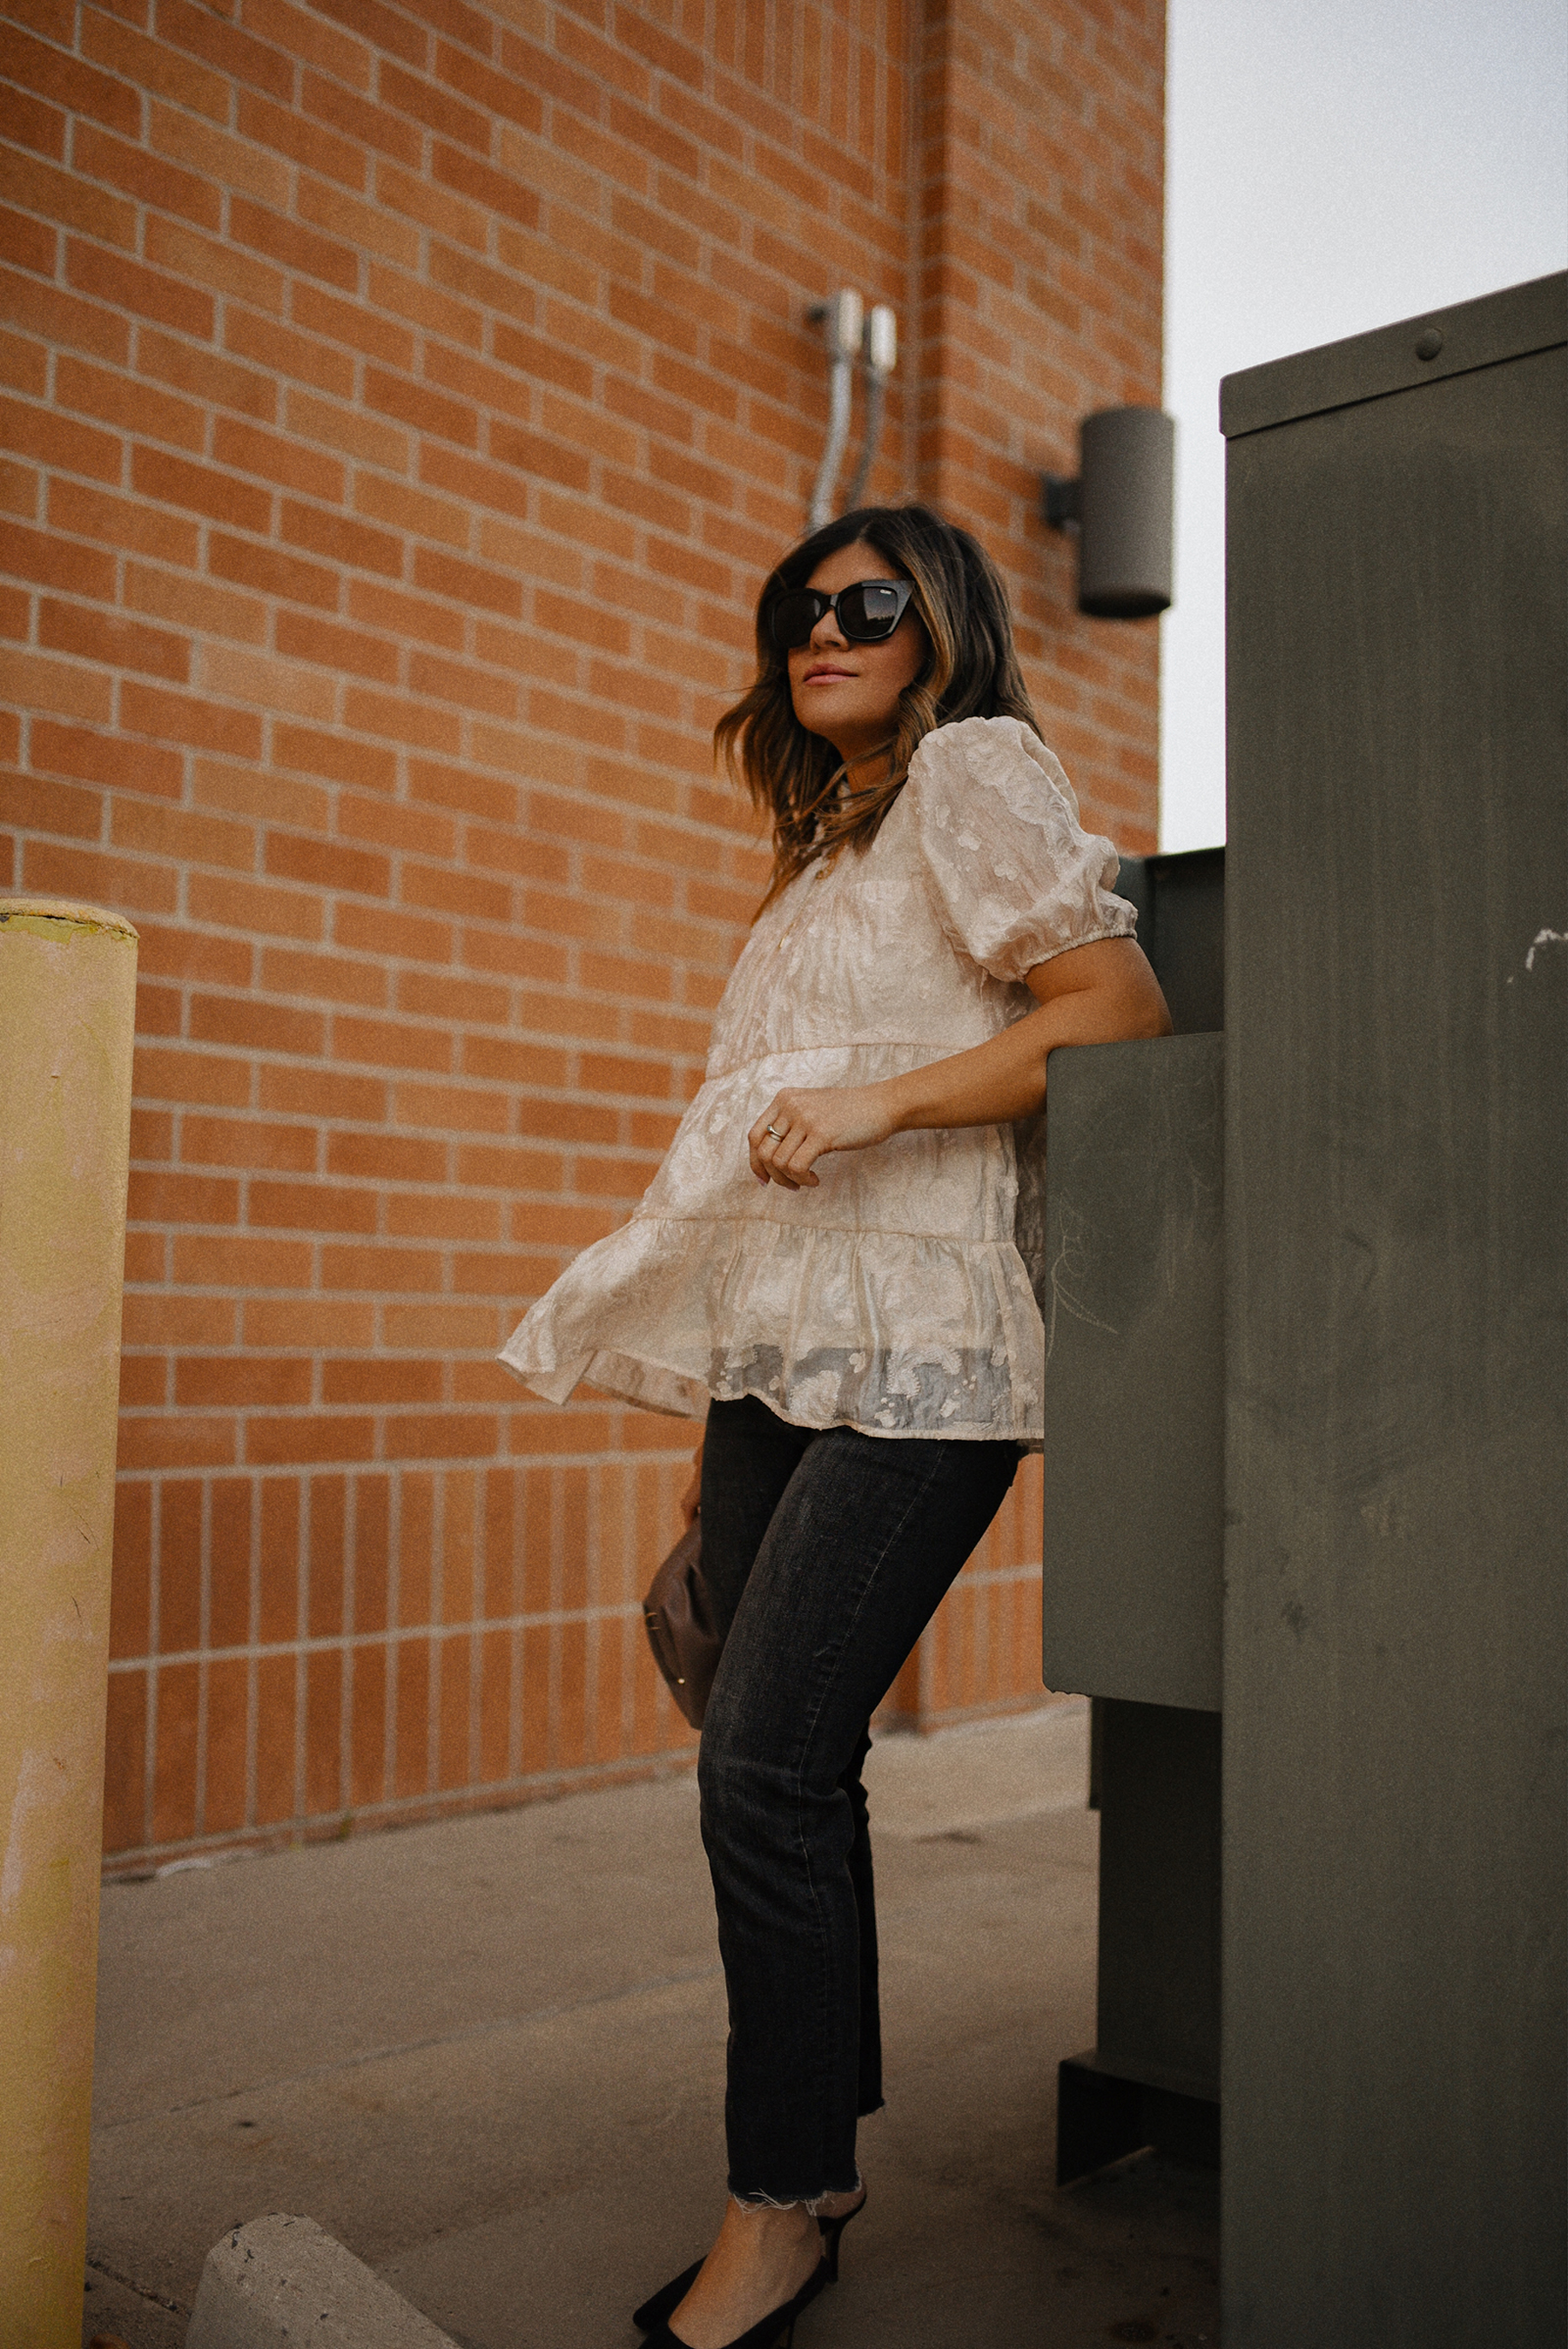 Carolina Hellal of Chic Talk wearing a floral A-line blouse, Levi's grey straight leg jeans, Quay eye cat sunglasses and Pelle moda black mules and Target pouch bag. 